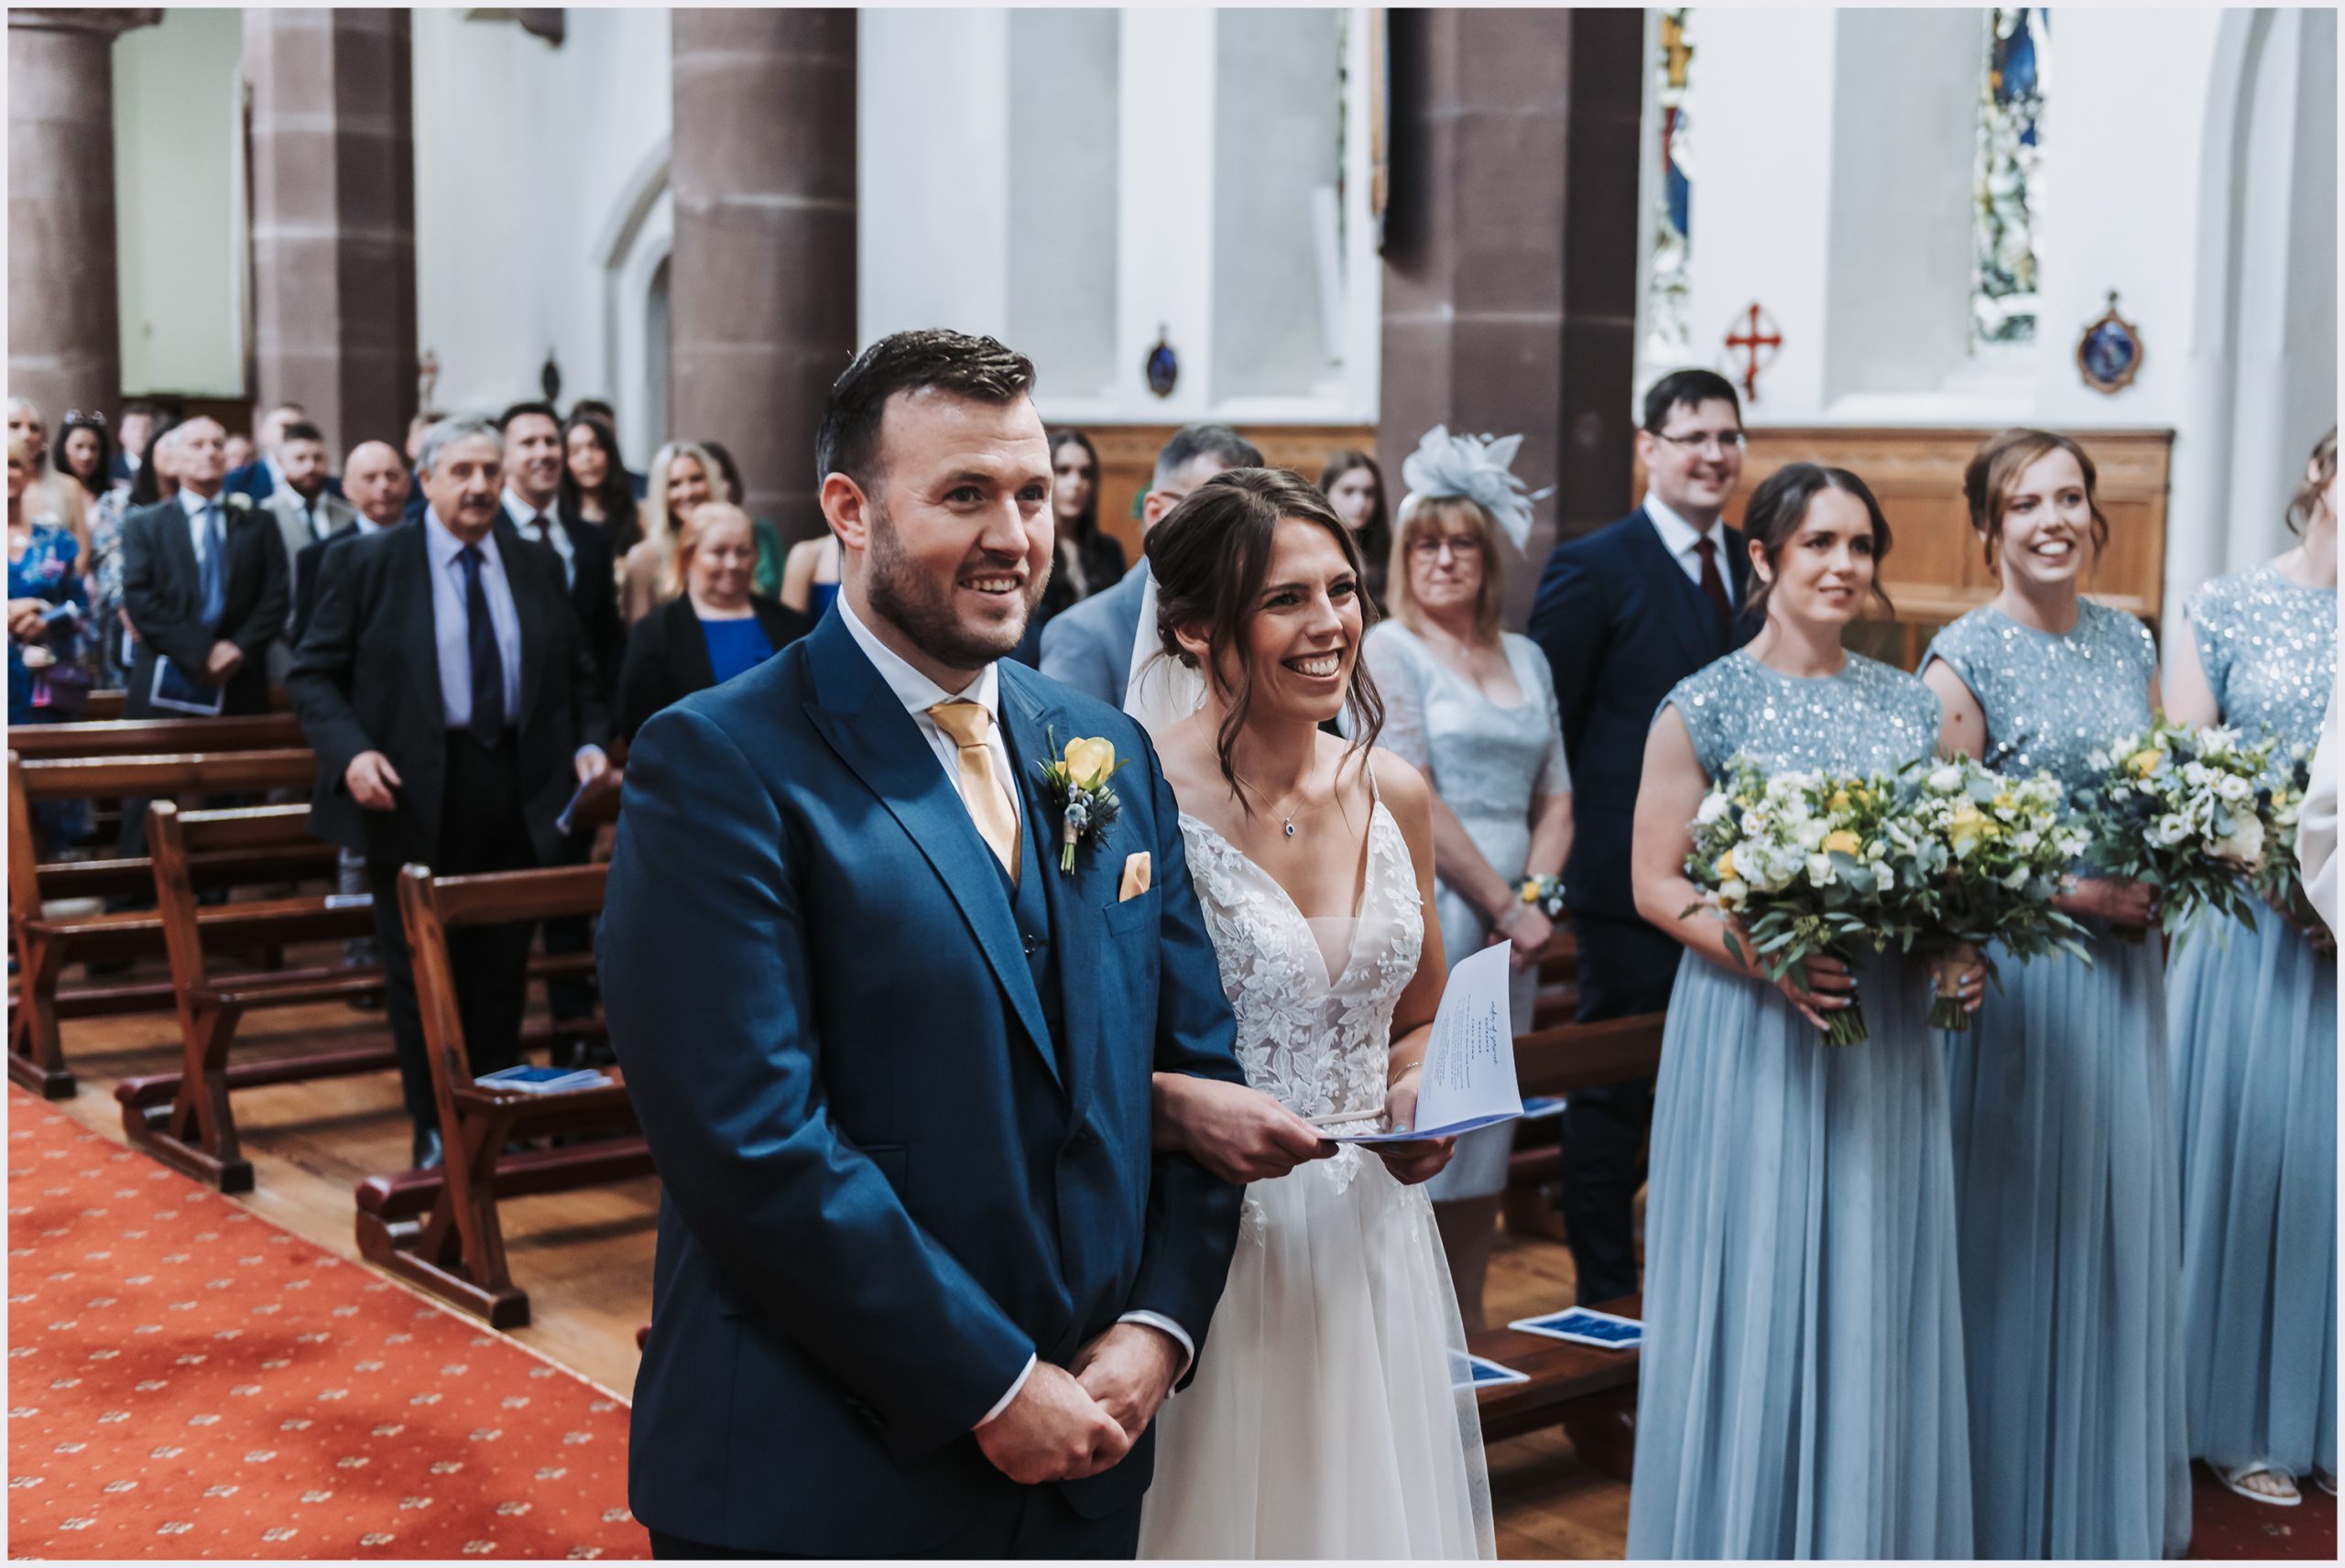 A beautiful bride and gorgeous groom stand side by side at the top of the aisle in a church during their wedding ceremony in Chester.